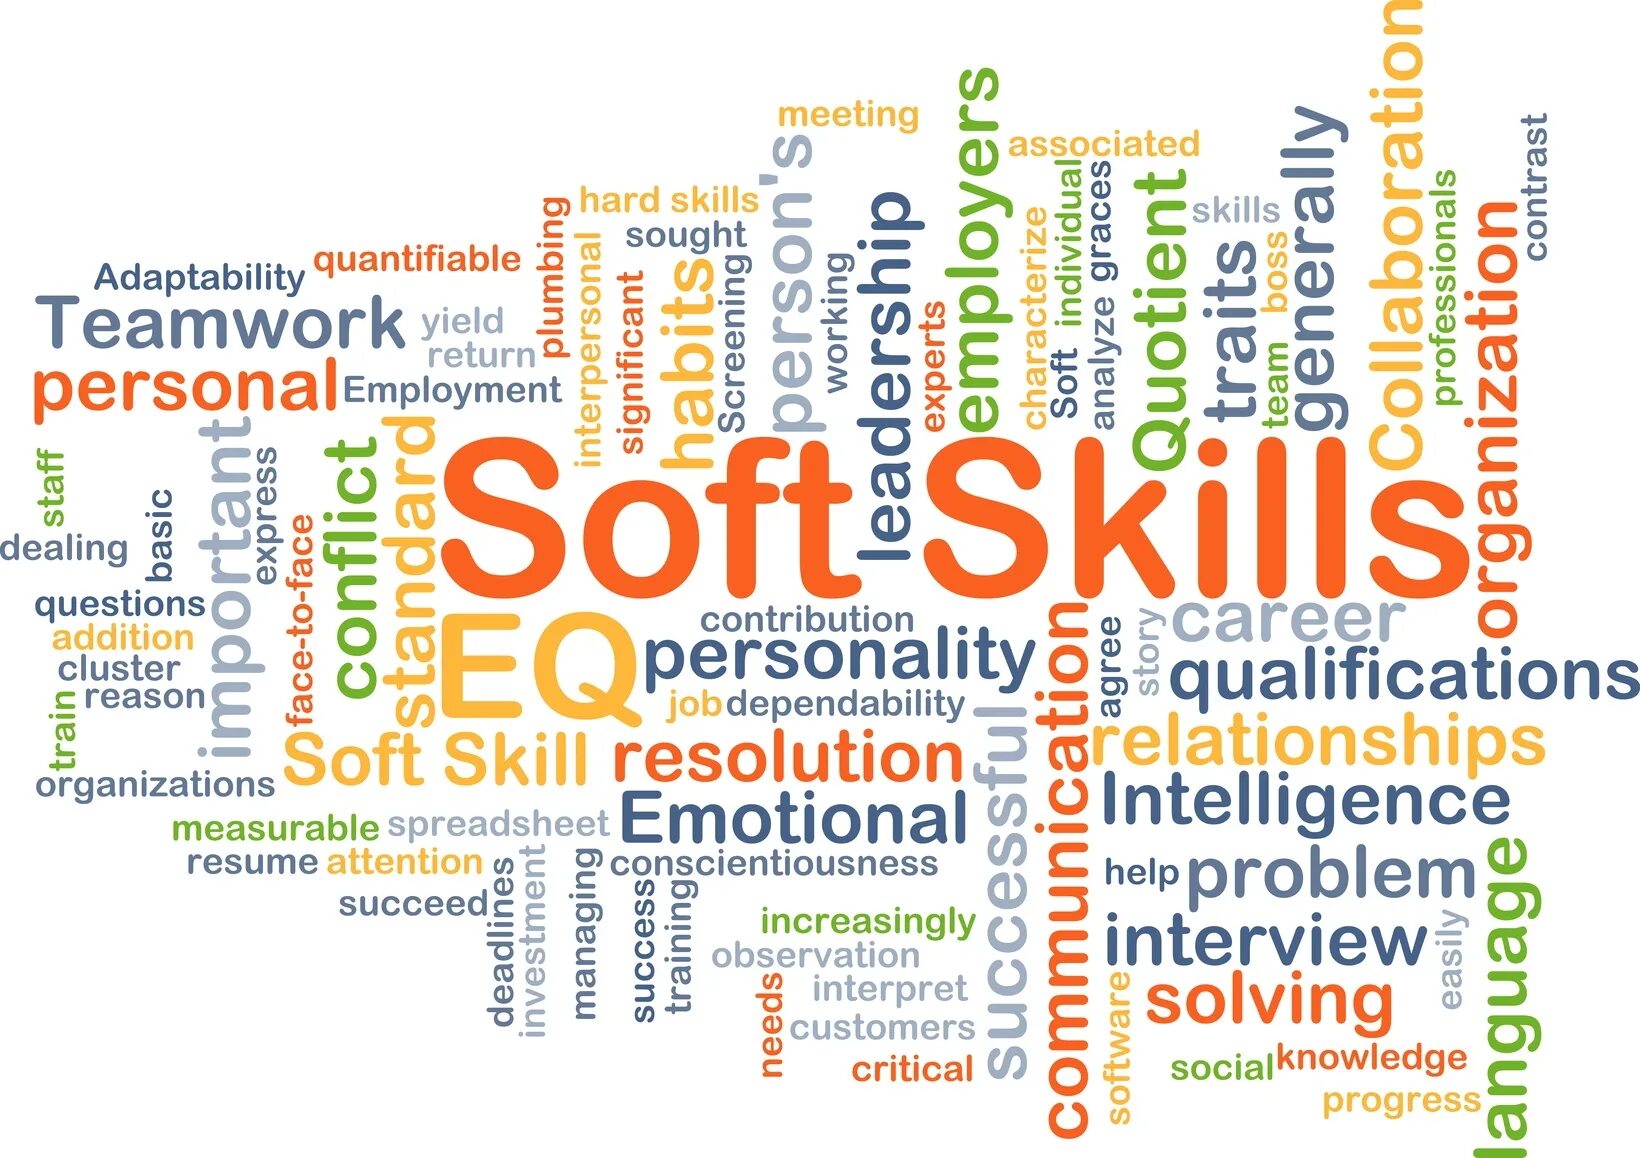 Софт Скиллс. Мягкие навыки Soft skills. Гибкие навыки Soft skills. - Формирование Soft-skills-навыков. Help and attention